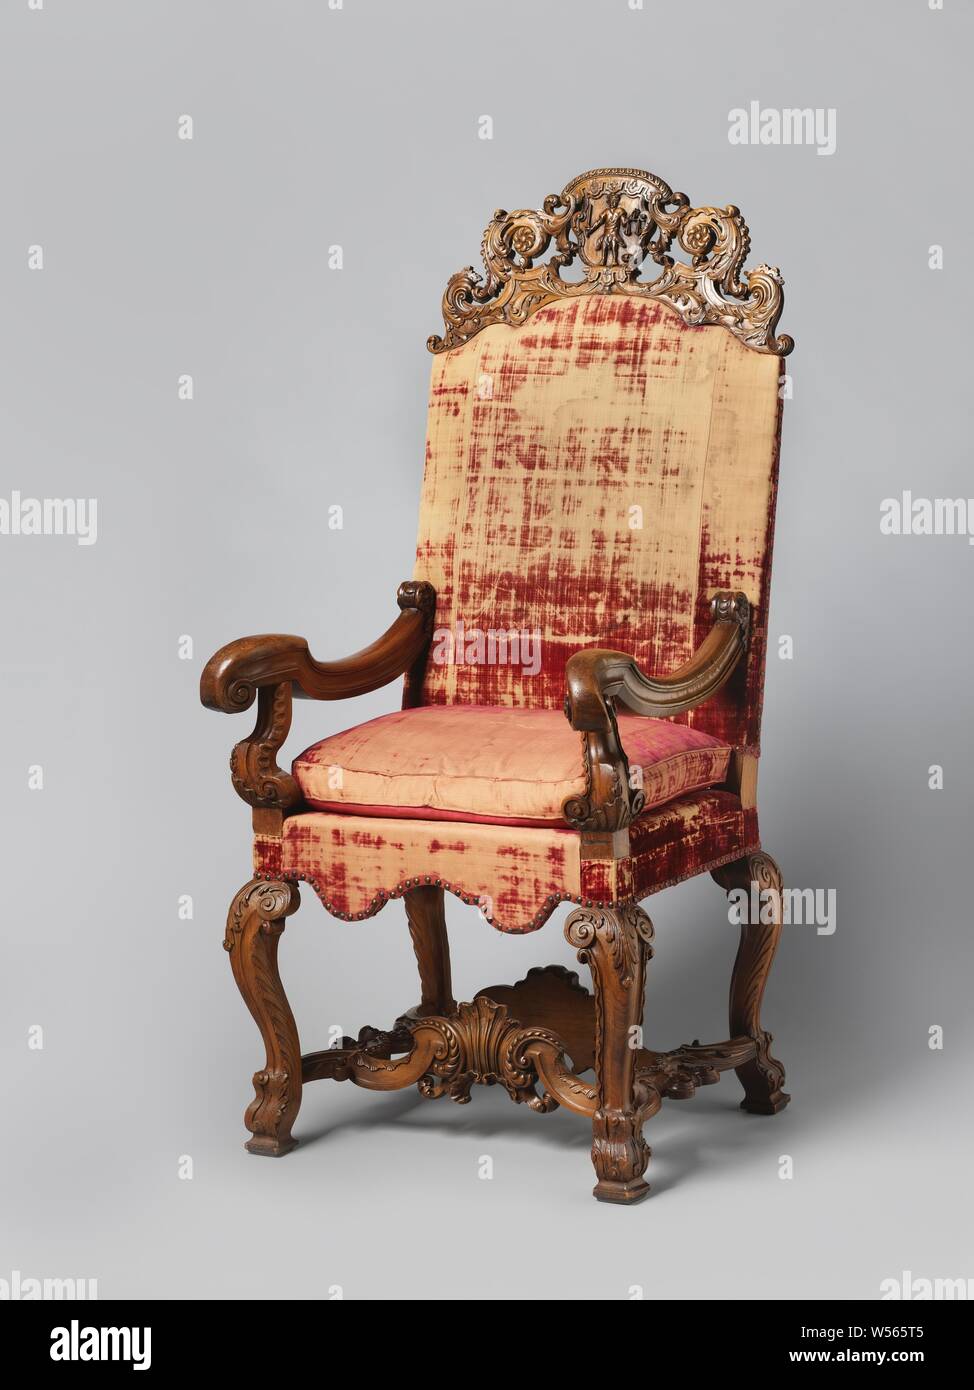 https://c8.alamy.com/comp/W565T5/judges-chair-made-of-walnut-and-elm-wood-covered-with-red-velvet-and-with-a-loose-cushion-with-inserted-attachment-with-acanthus-volutes-and-shield-with-lambrequins-depicting-justitia-judges-chair-with-walnut-legs-and-armrest-struts-made-of-elm-wood-covered-with-red-velvet-and-with-a-loose-cushion-it-rests-on-s-shaped-legs-placed-at-an-angle-decorated-with-acanthus-leaves-the-armrests-are-hollowed-and-end-in-a-volute-the-upper-threshold-has-a-stabbed-attachment-adorned-with-acanthusvoluten-on-either-side-of-a-shield-with-lamb-brekin-on-which-justitia-stands-probably-W565T5.jpg